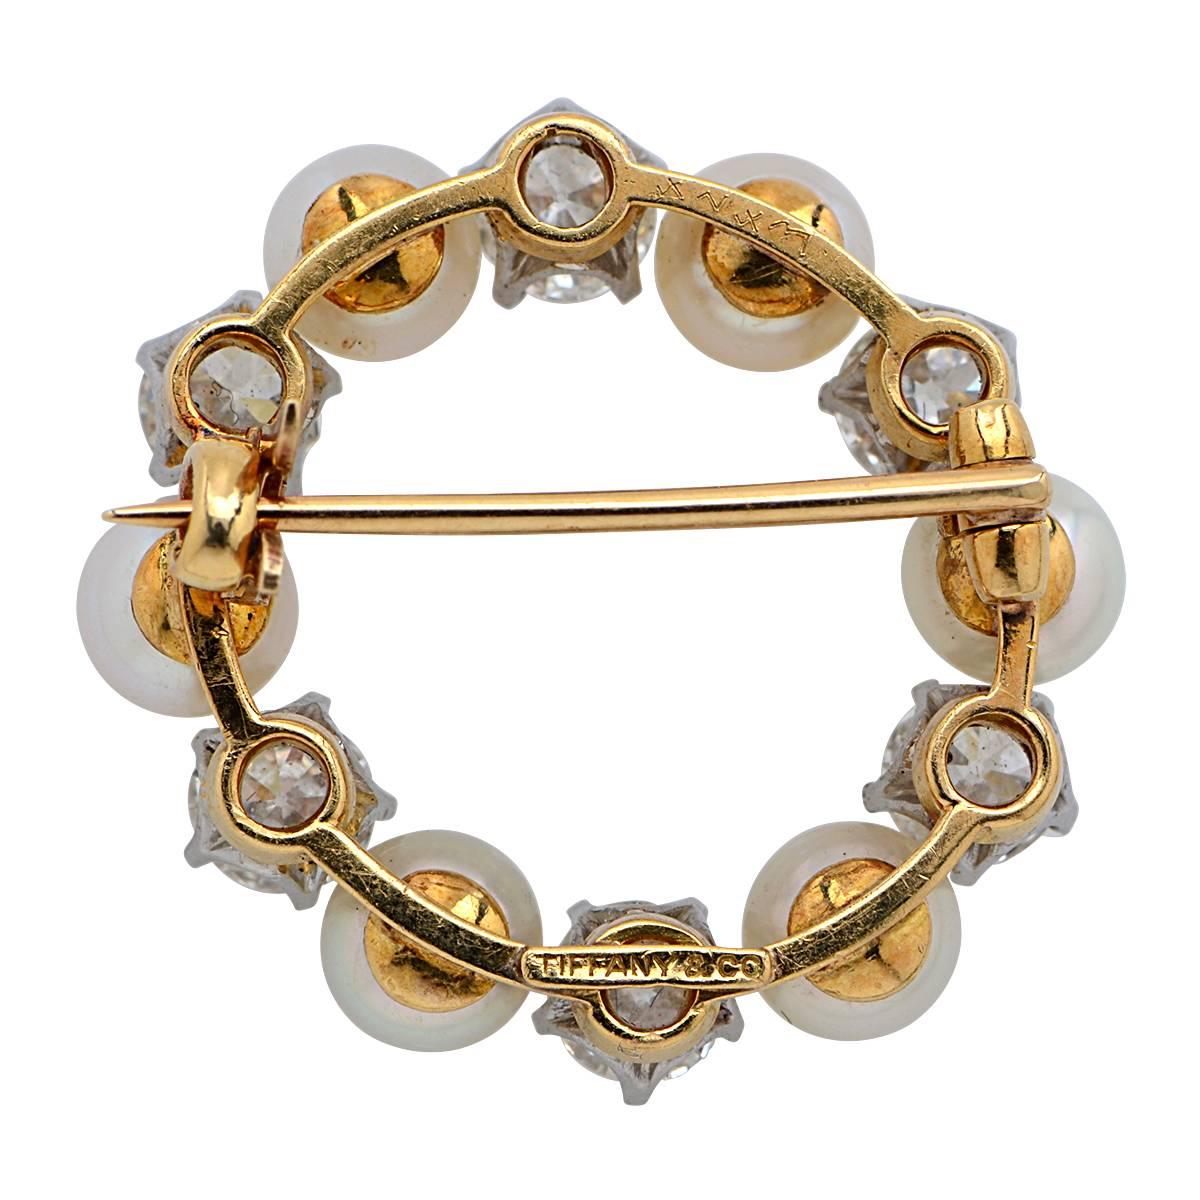 18 Karat Yellow Gold & Natural Pearl Vintage Tiffany & Co. Brooch Featuring 6 Old European Cut Diamonds Weighing Approximately 2.00 Carats, G Color, VS Clarity.

Measurements: 1